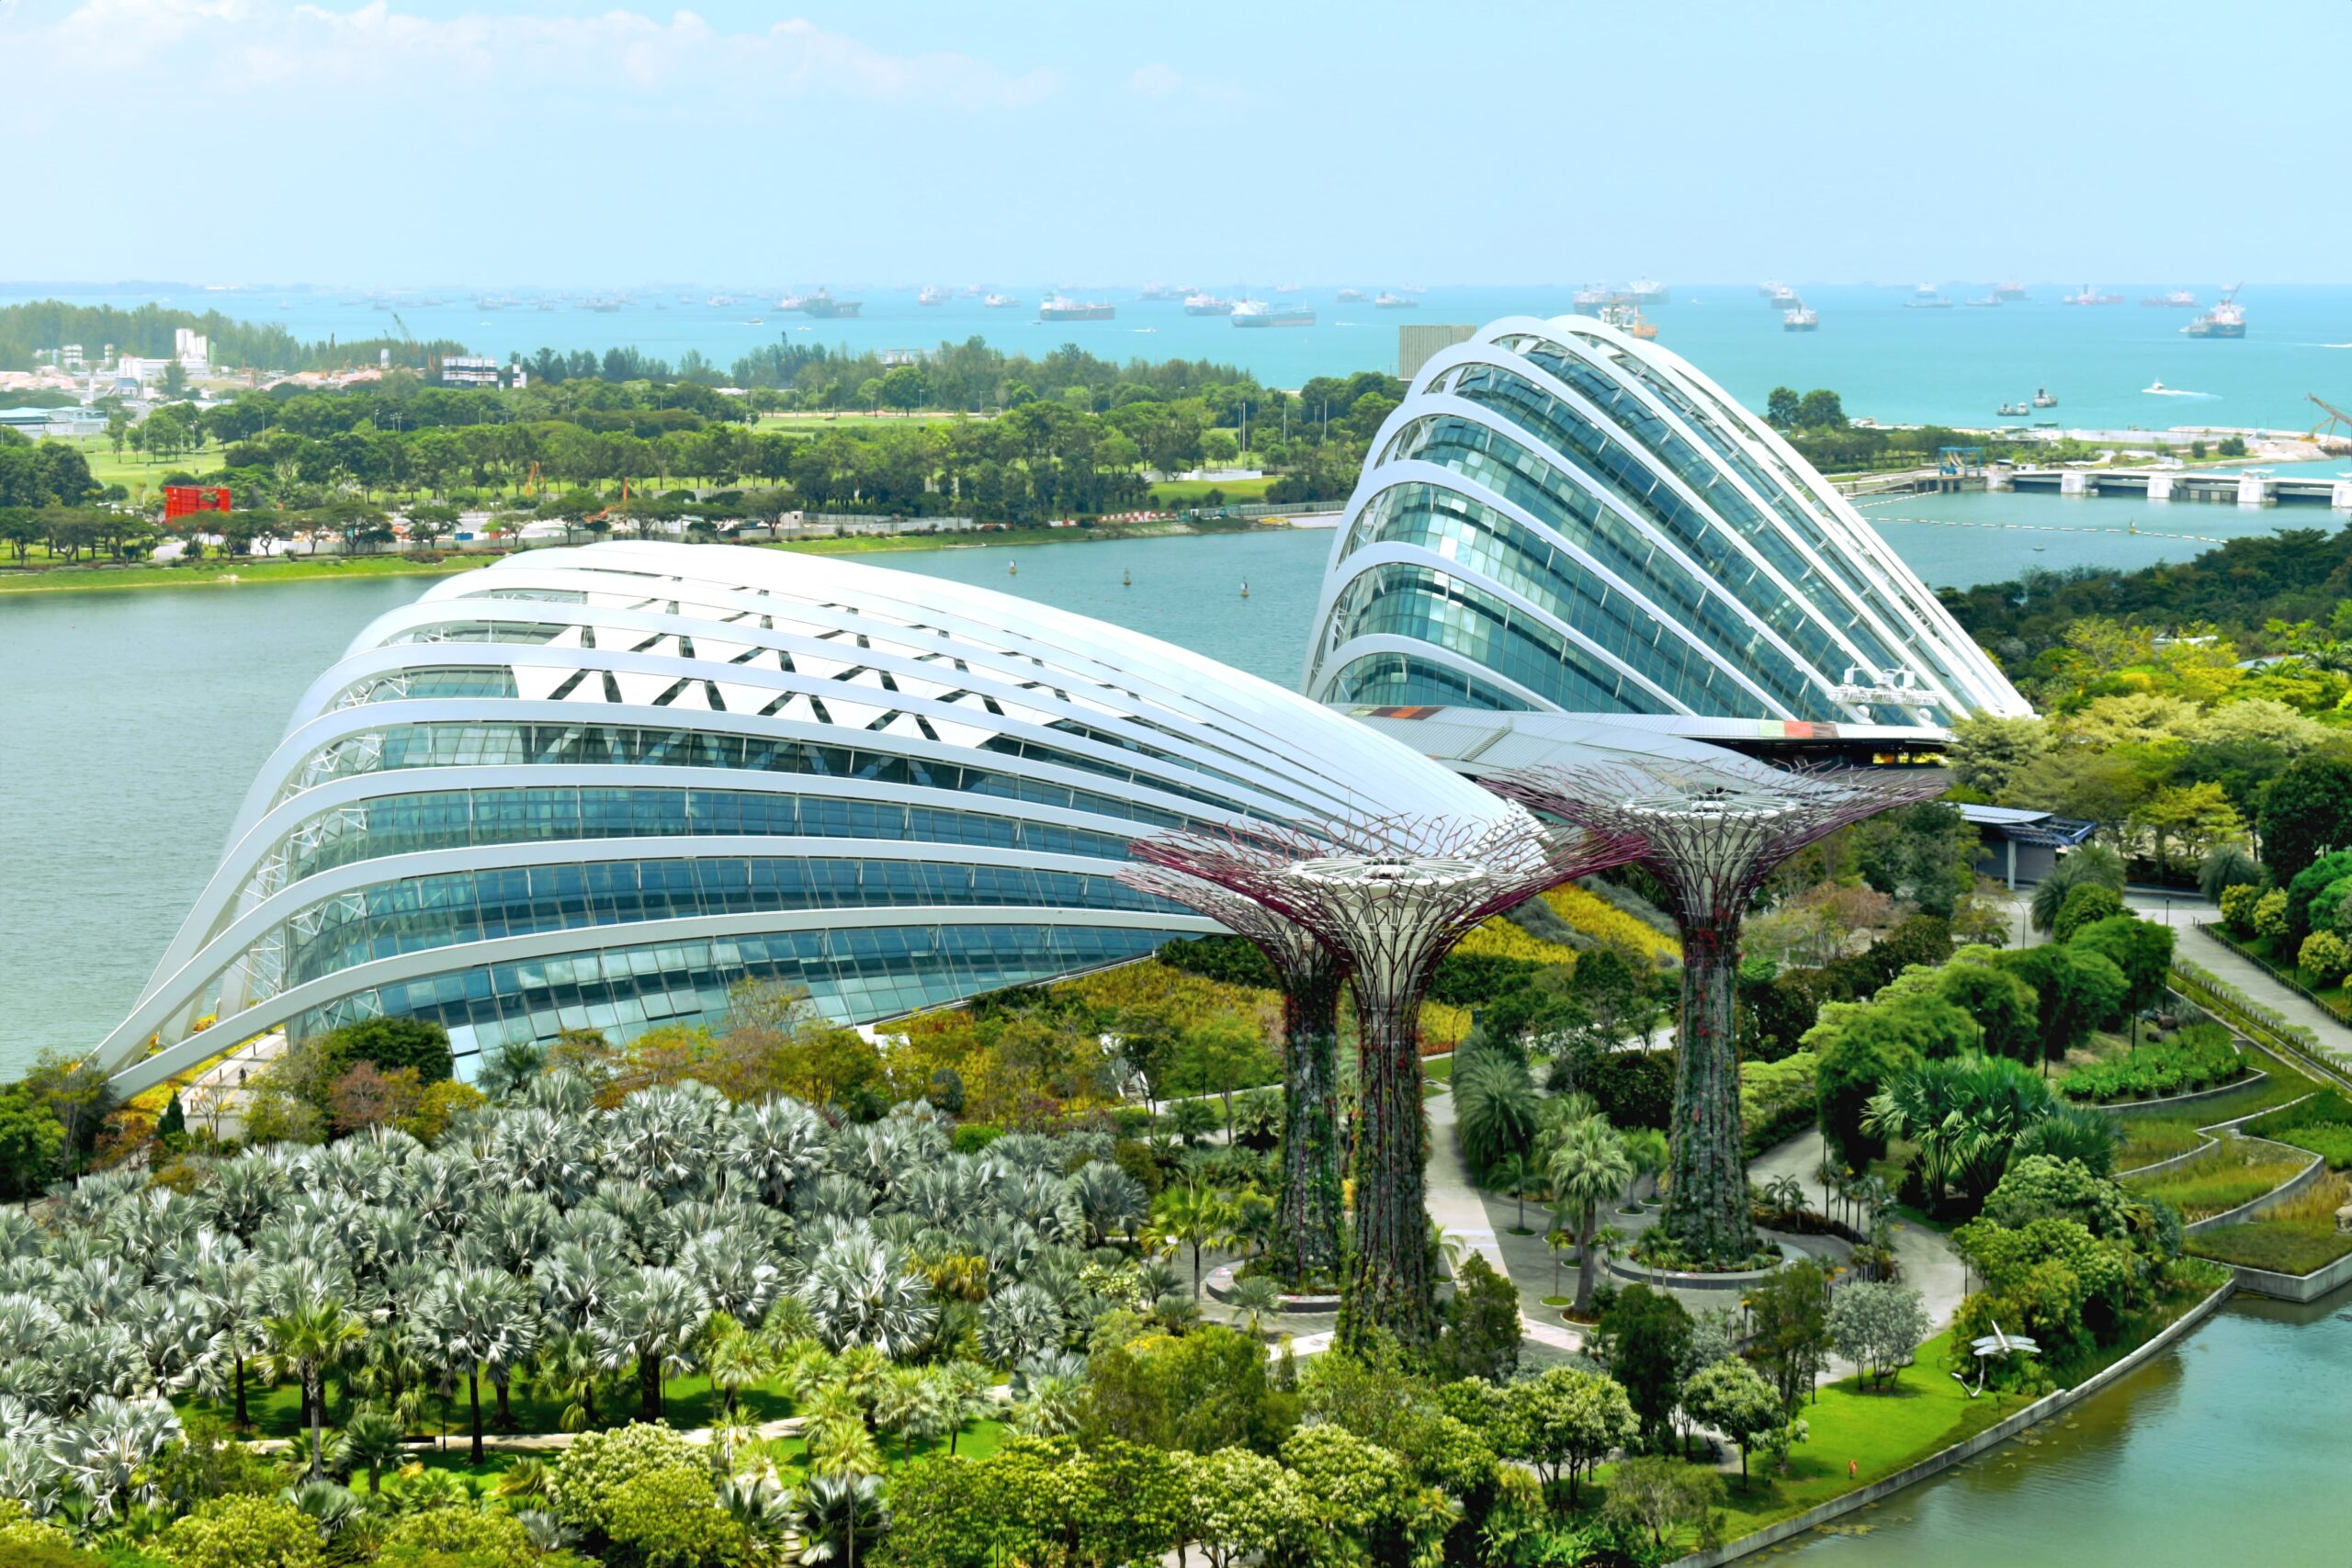 Gardens by the bay, Singapore (1)